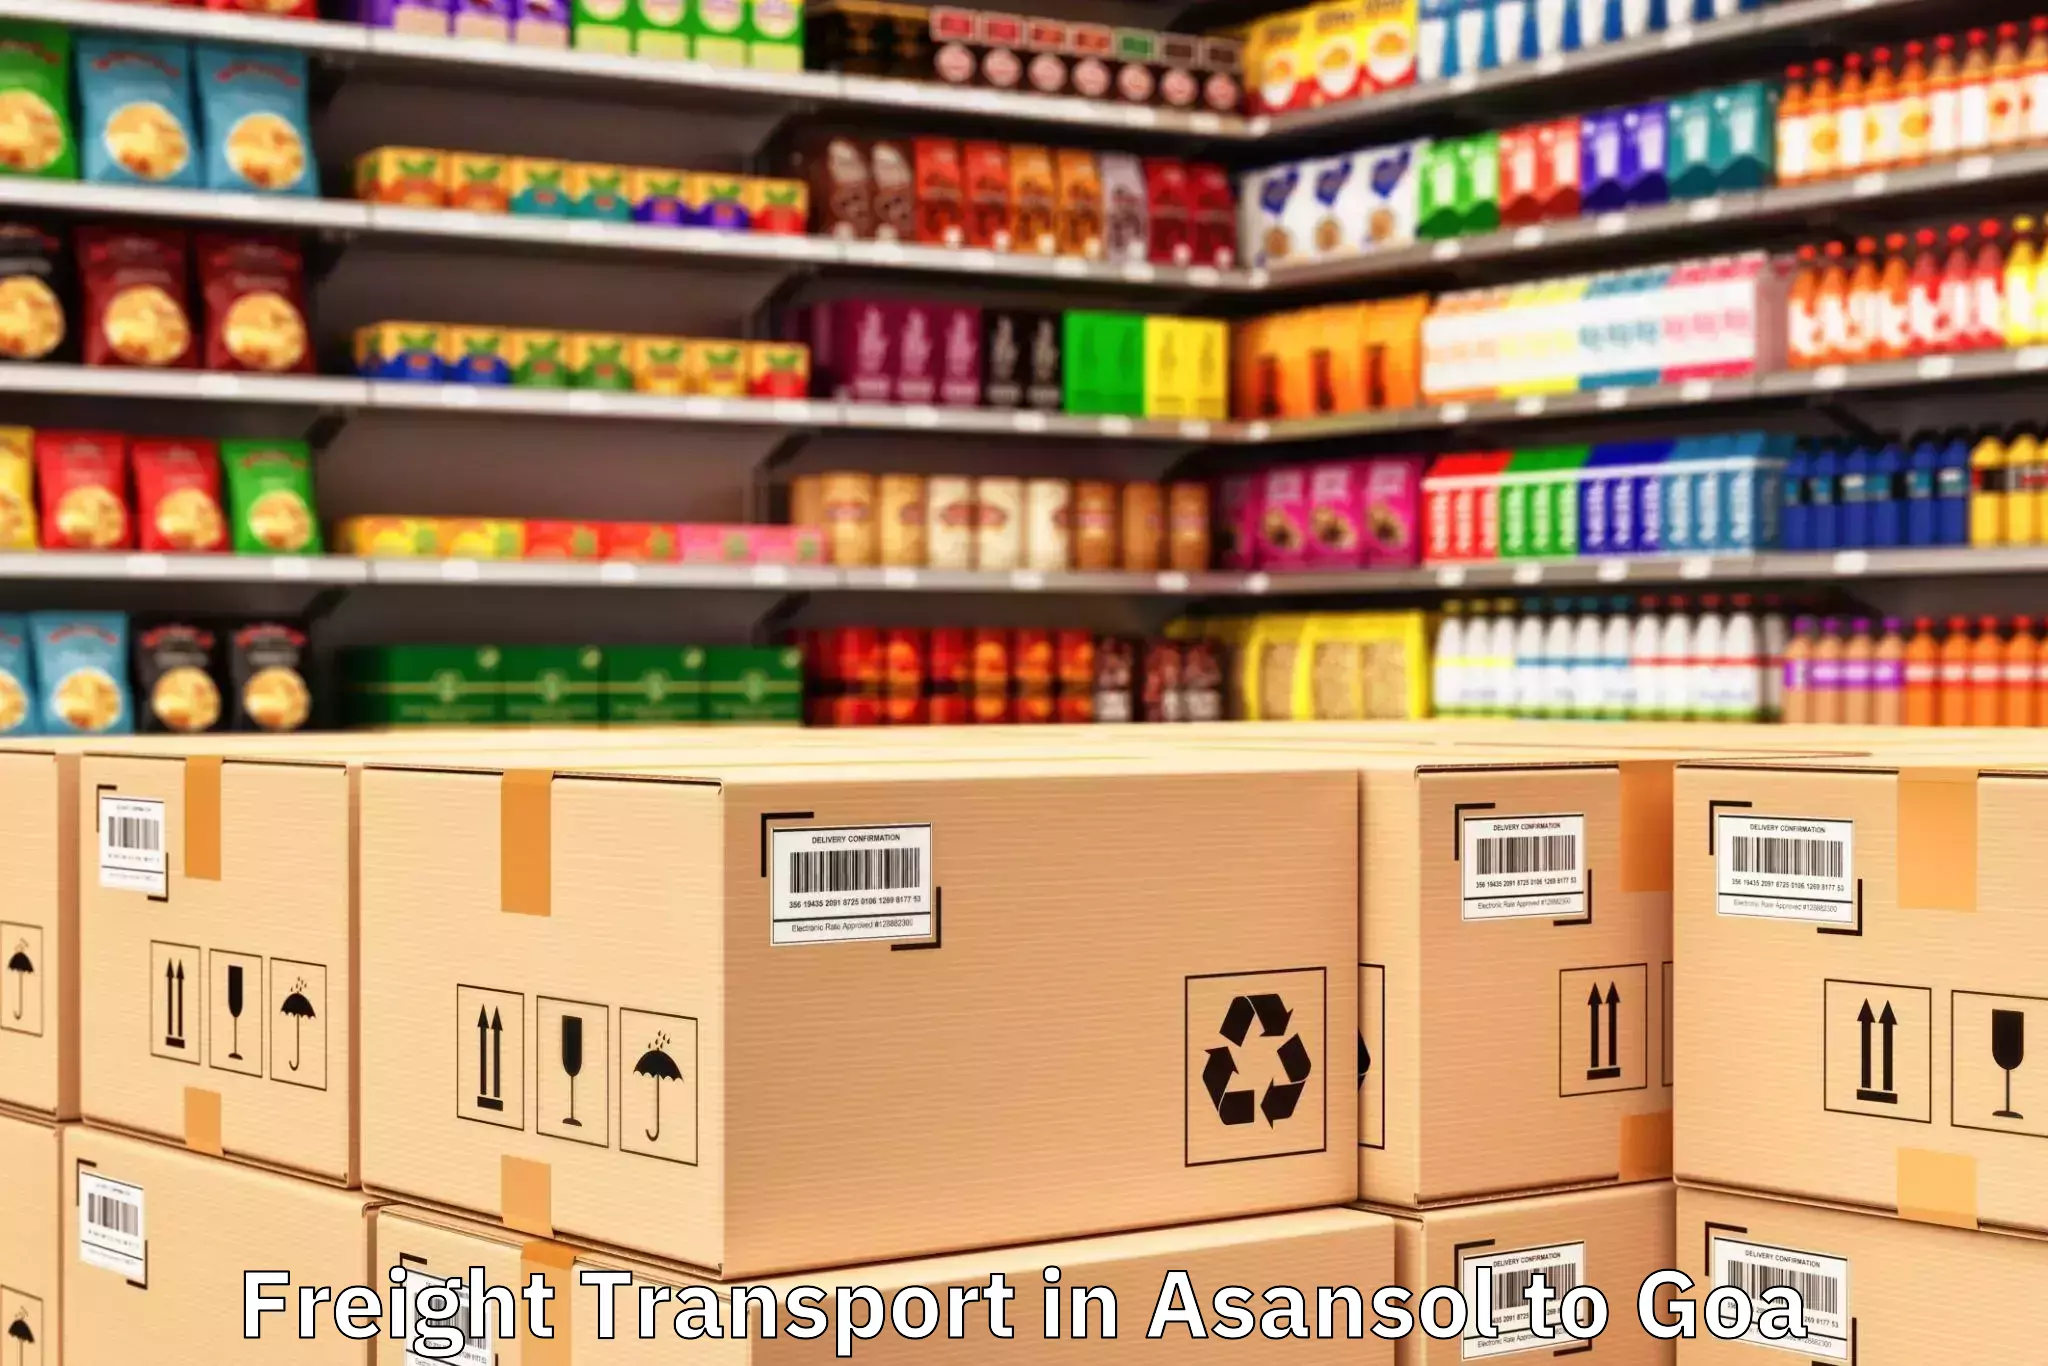 Top Asansol to Davorlim Freight Transport Available